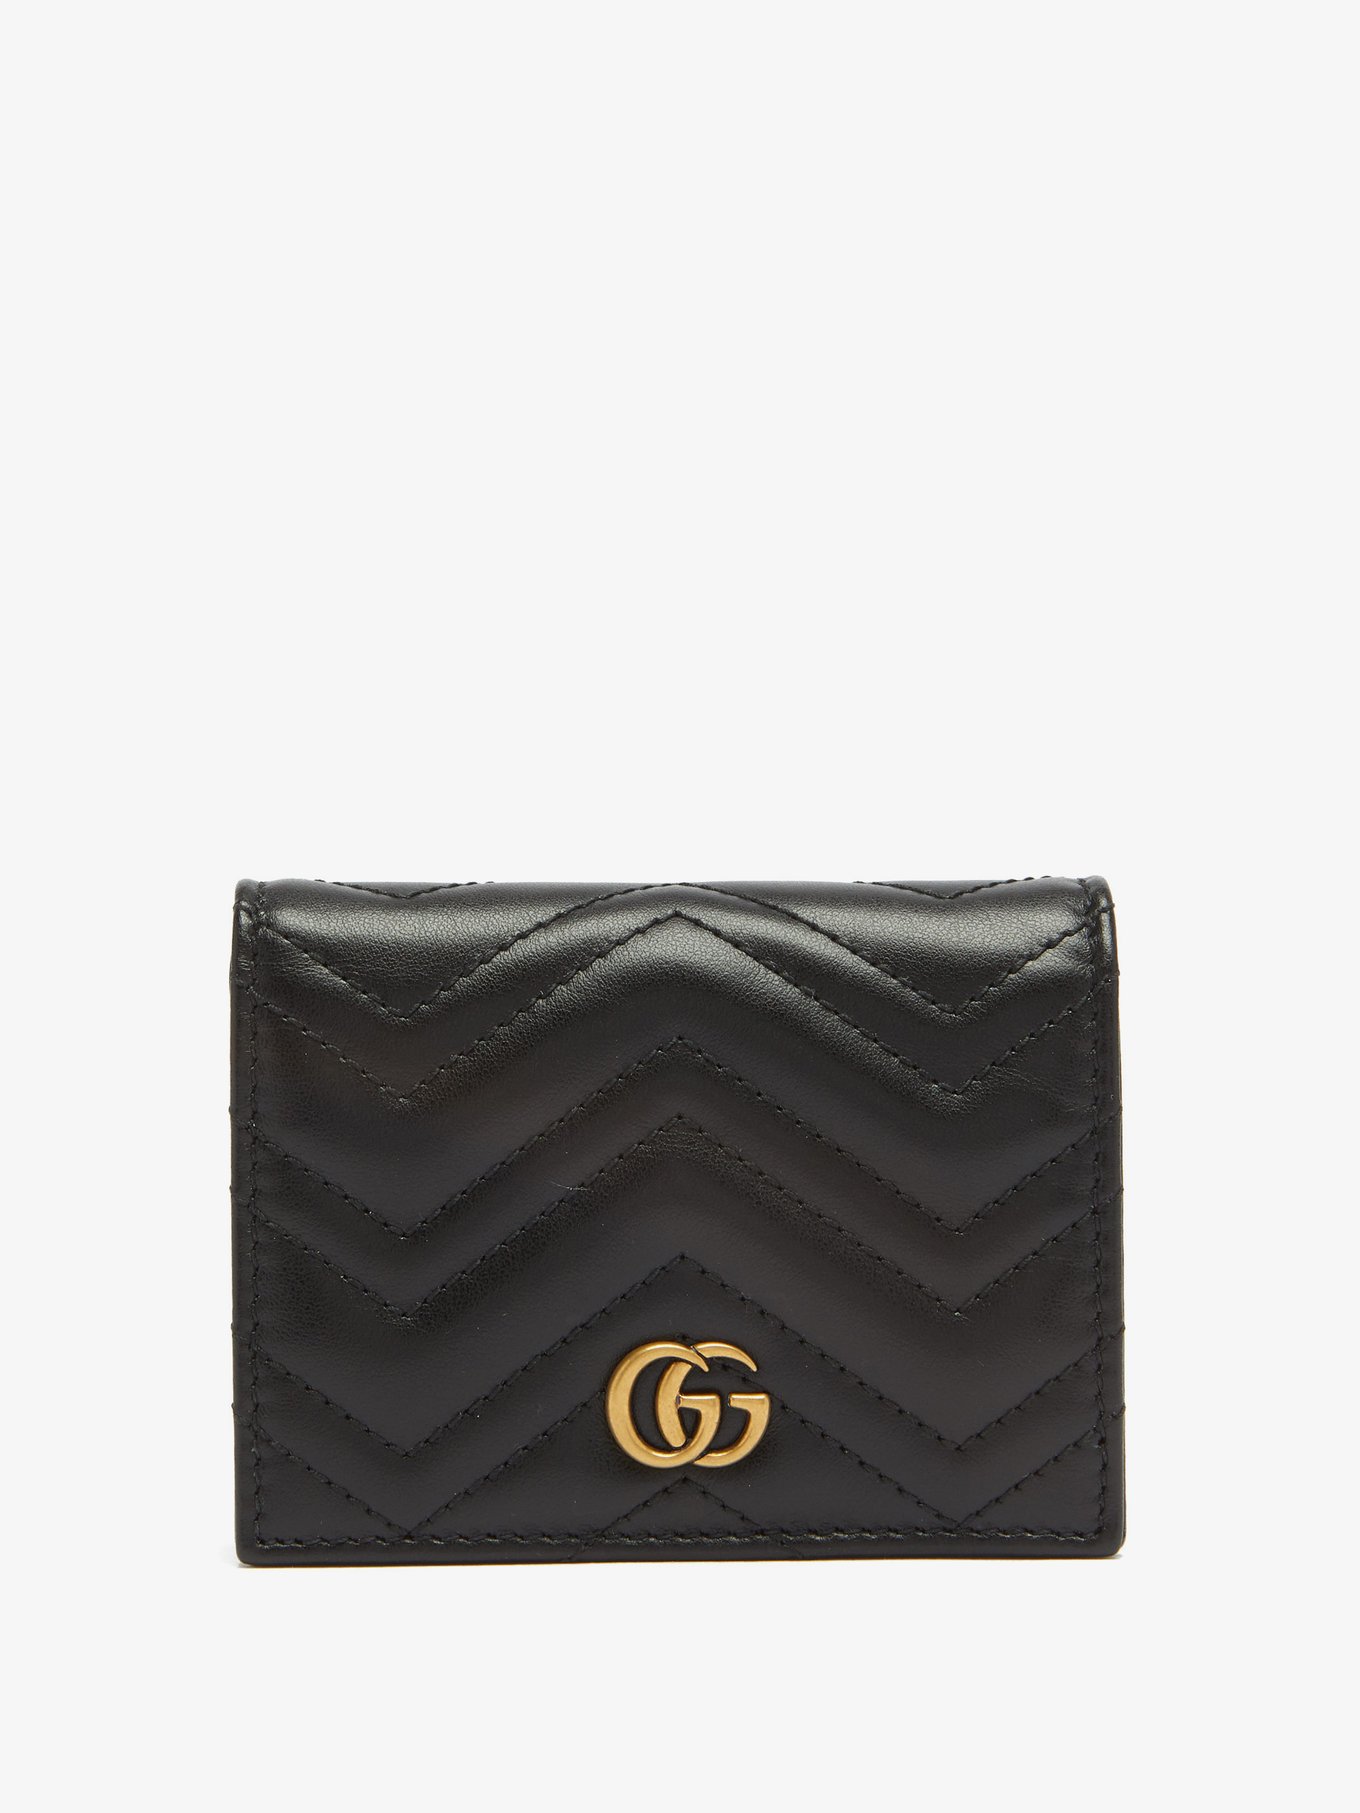 GG Marmont quilted-leather wallet | Gucci